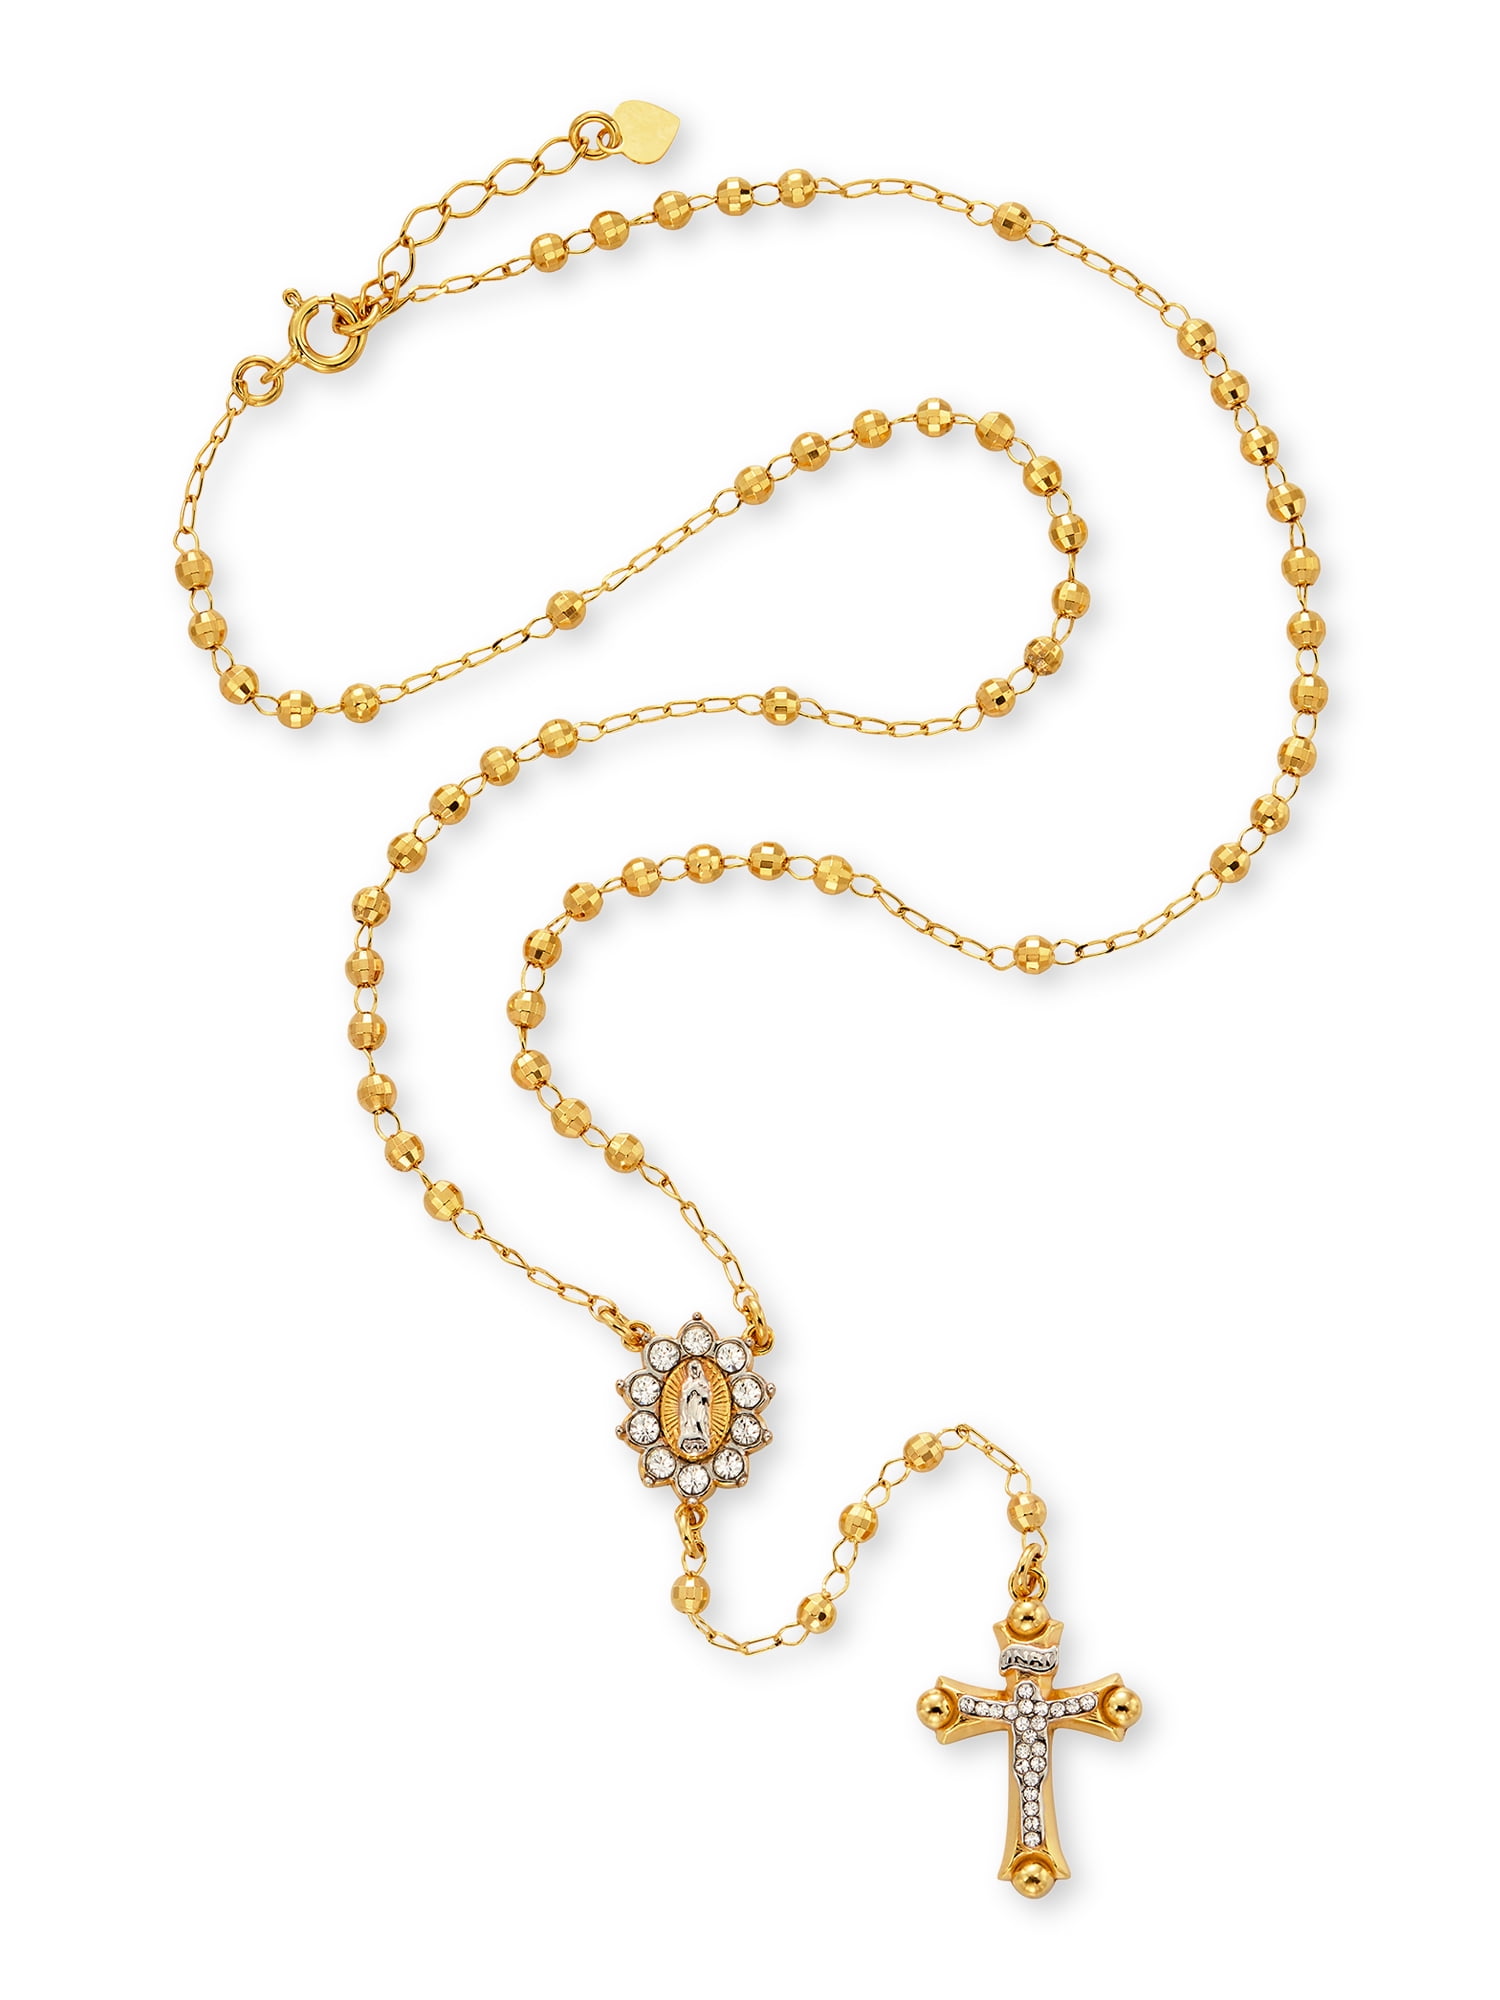 18k Gold Layered Medium Bead Rosary Necklace with Virgin Image Photo L –  Bella Joias Miami